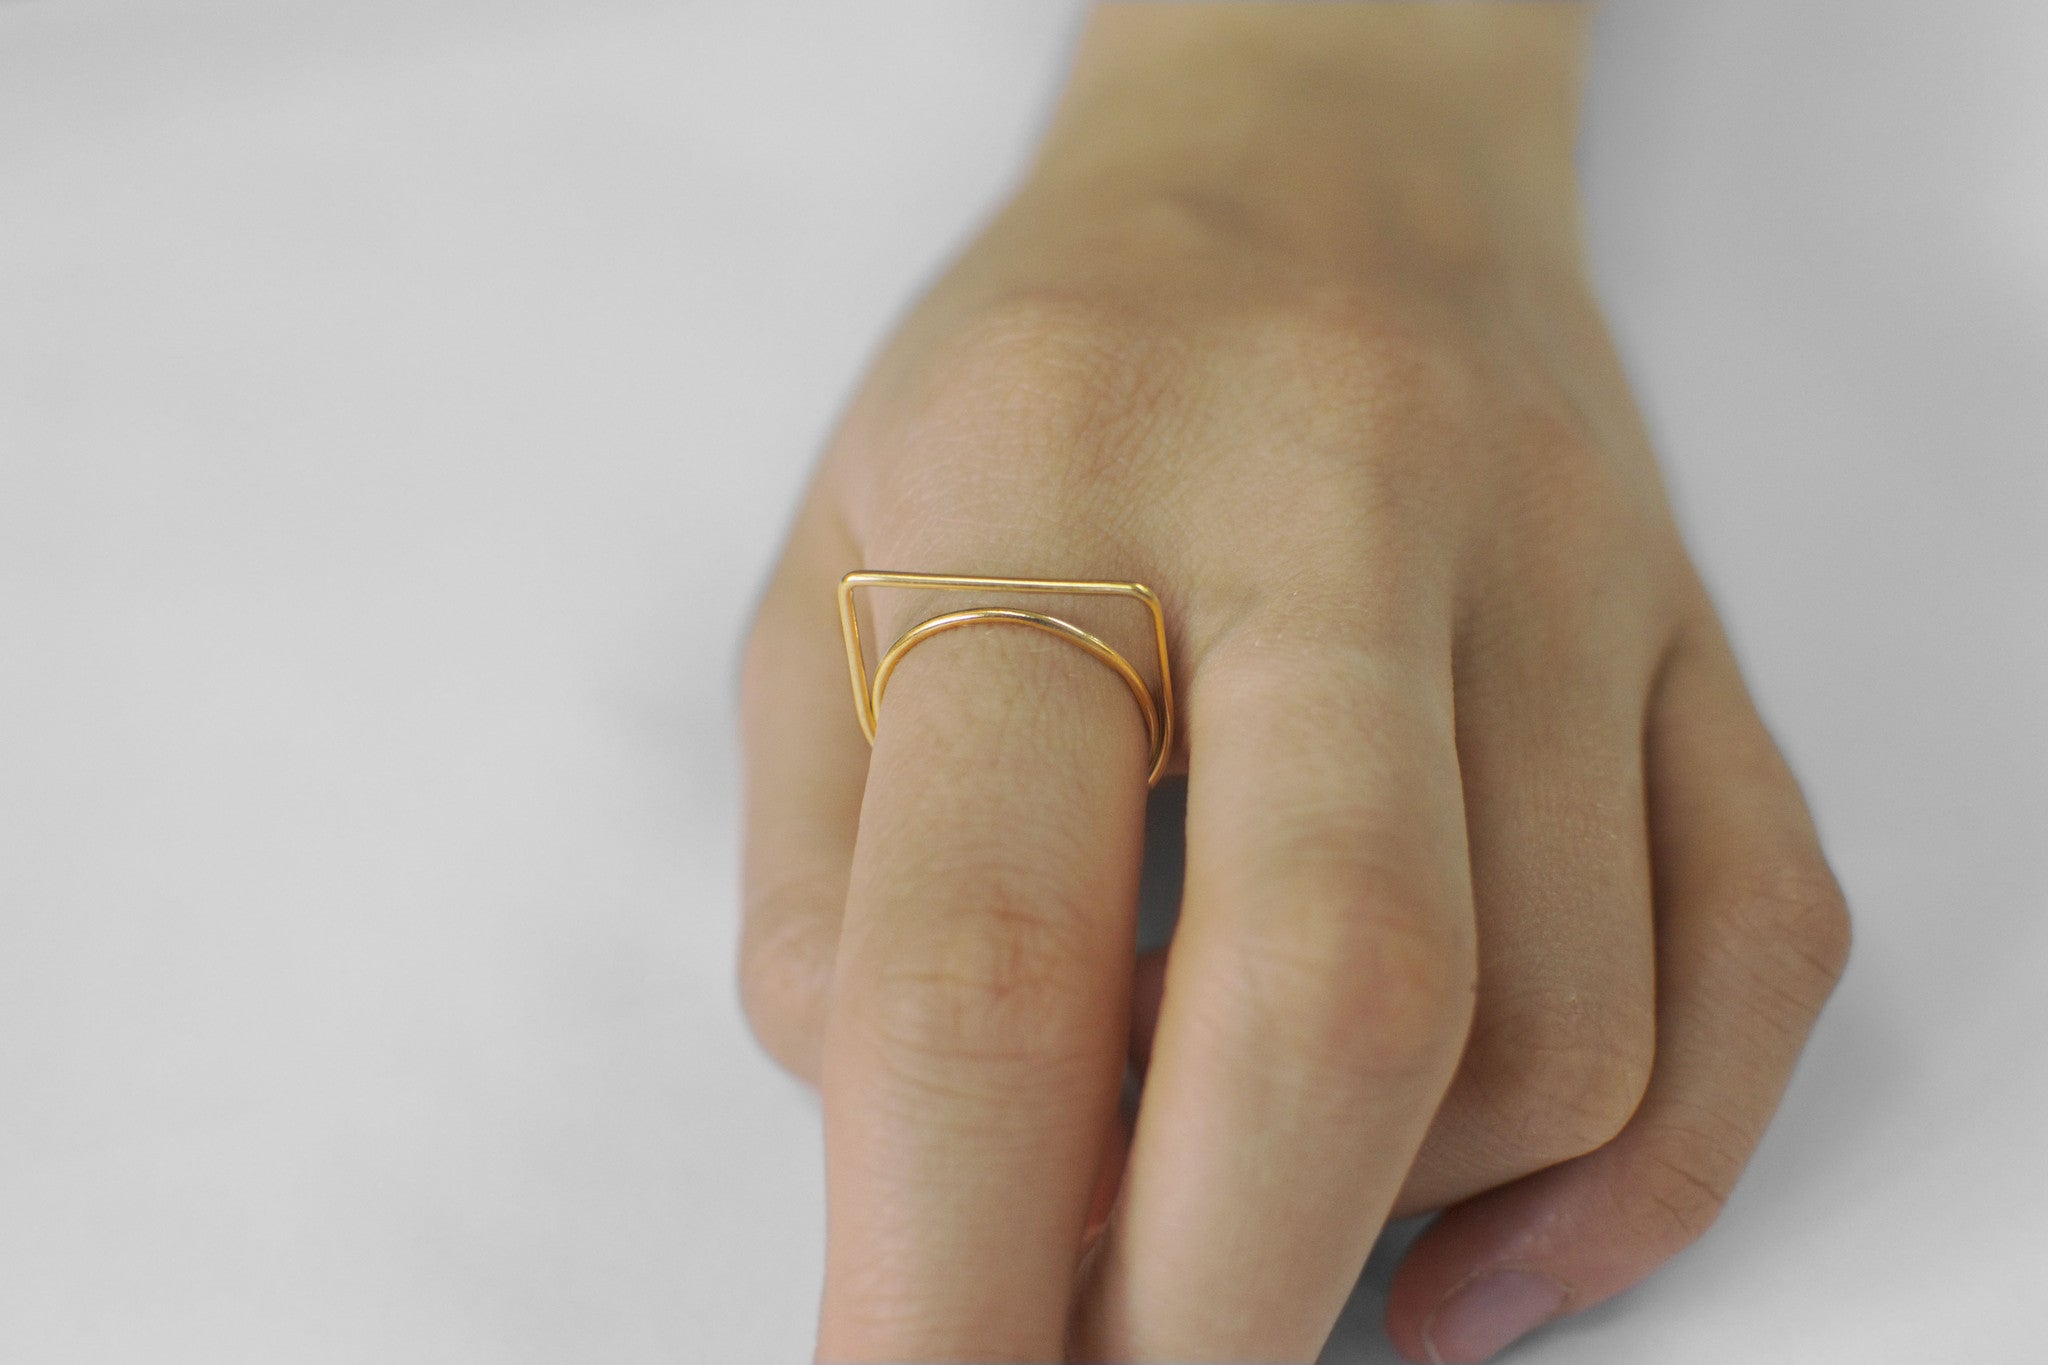 →Square Top← Finger Ring